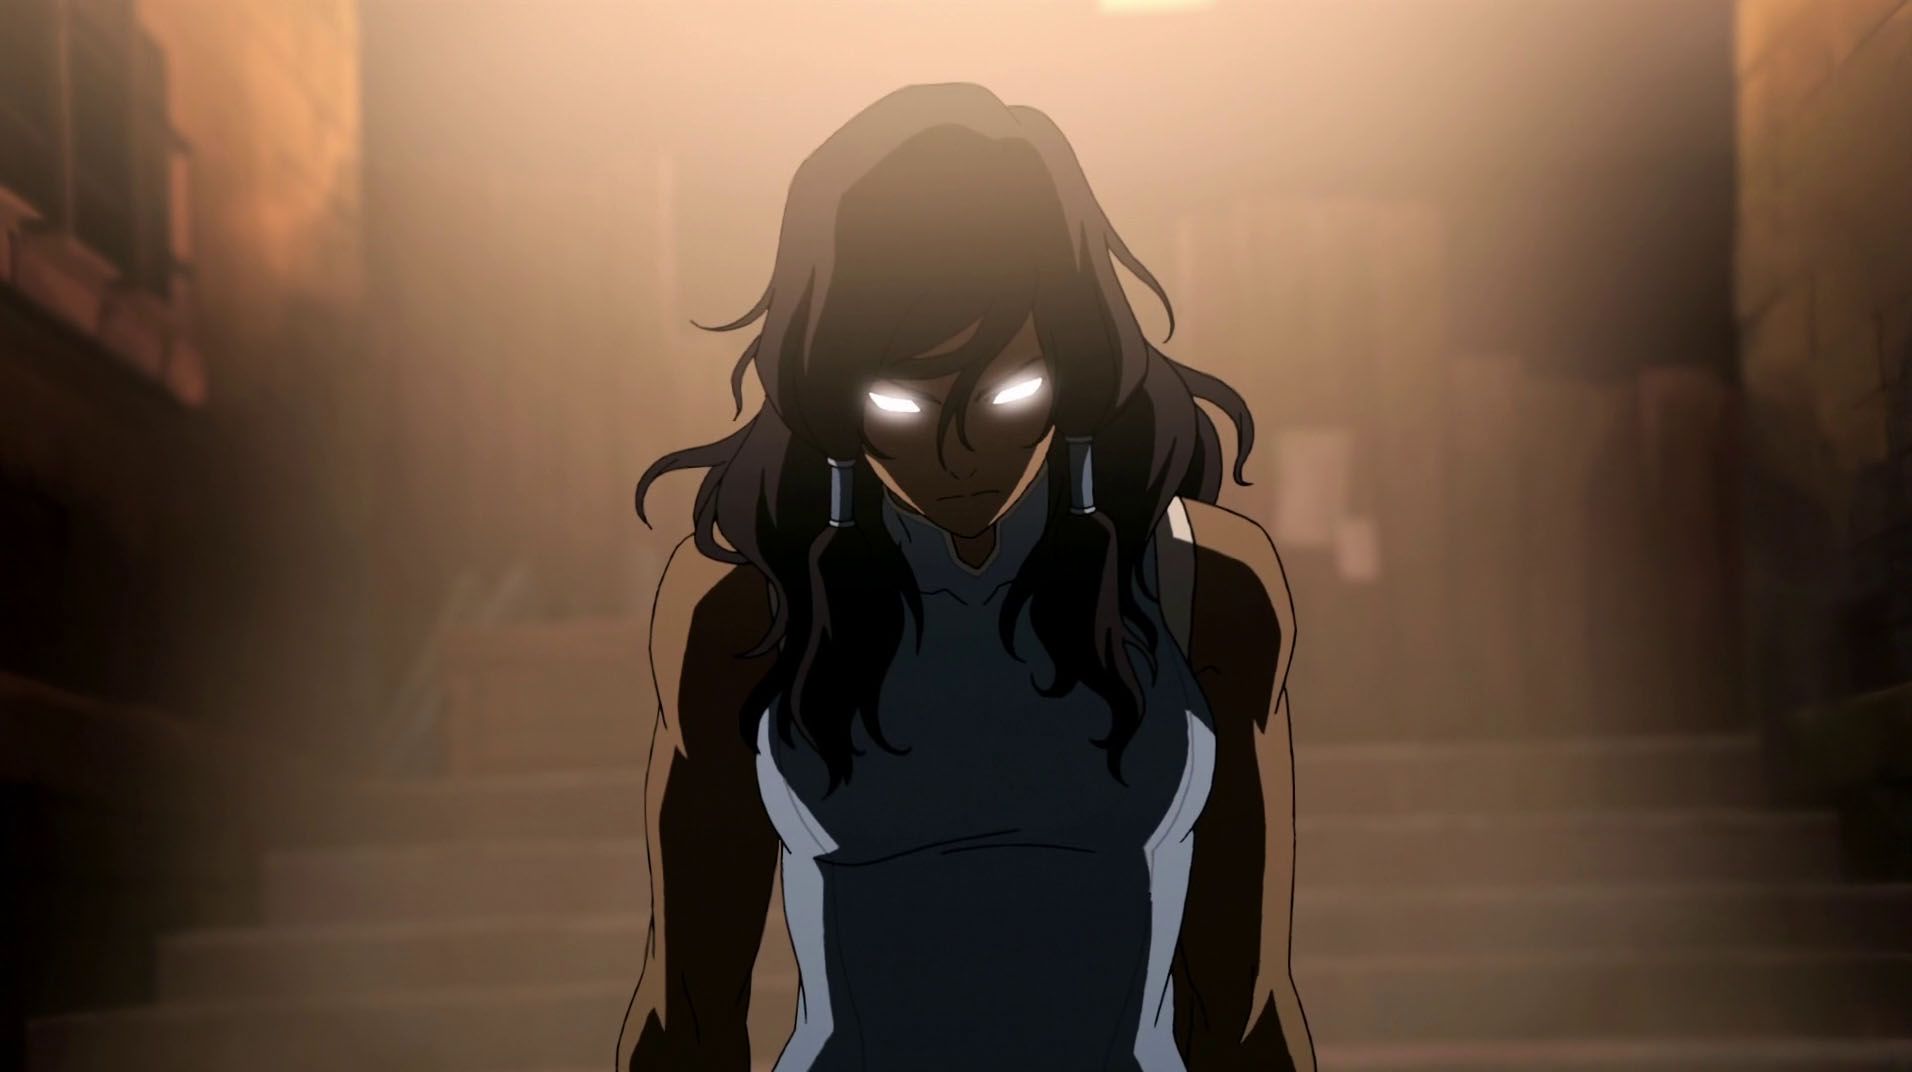 Korra's avatar state haunts her after her near-death experience in season three